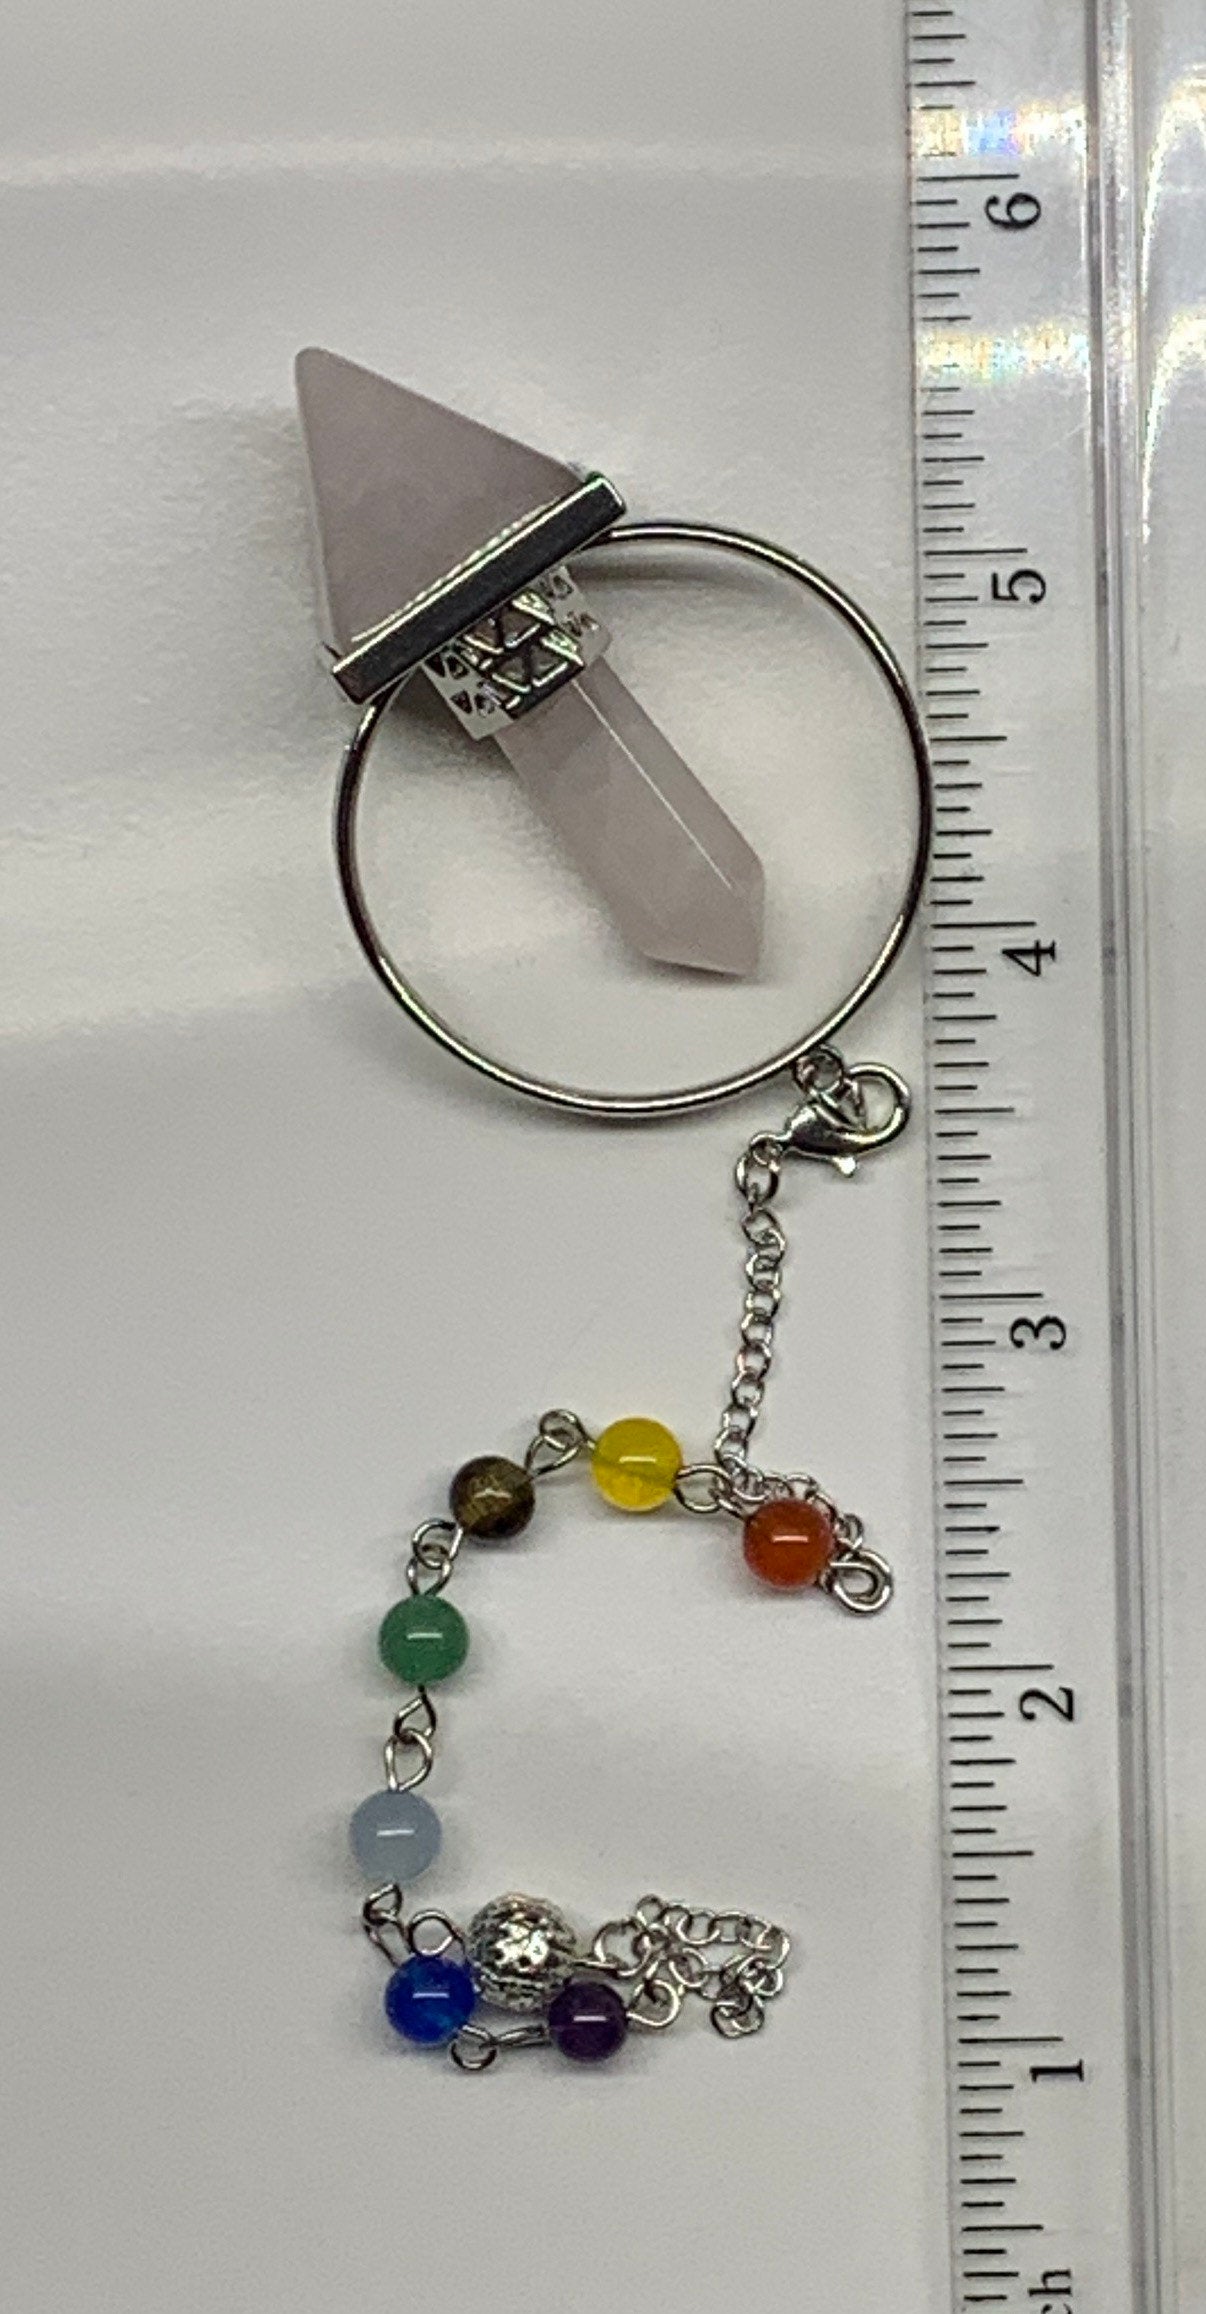 2 in pendulum including rose quartz inverted pyramid attached to rose quartz crystal point in a silver hoop, connected to an 8 inch chain including chakra beads displayed next to a ruler.